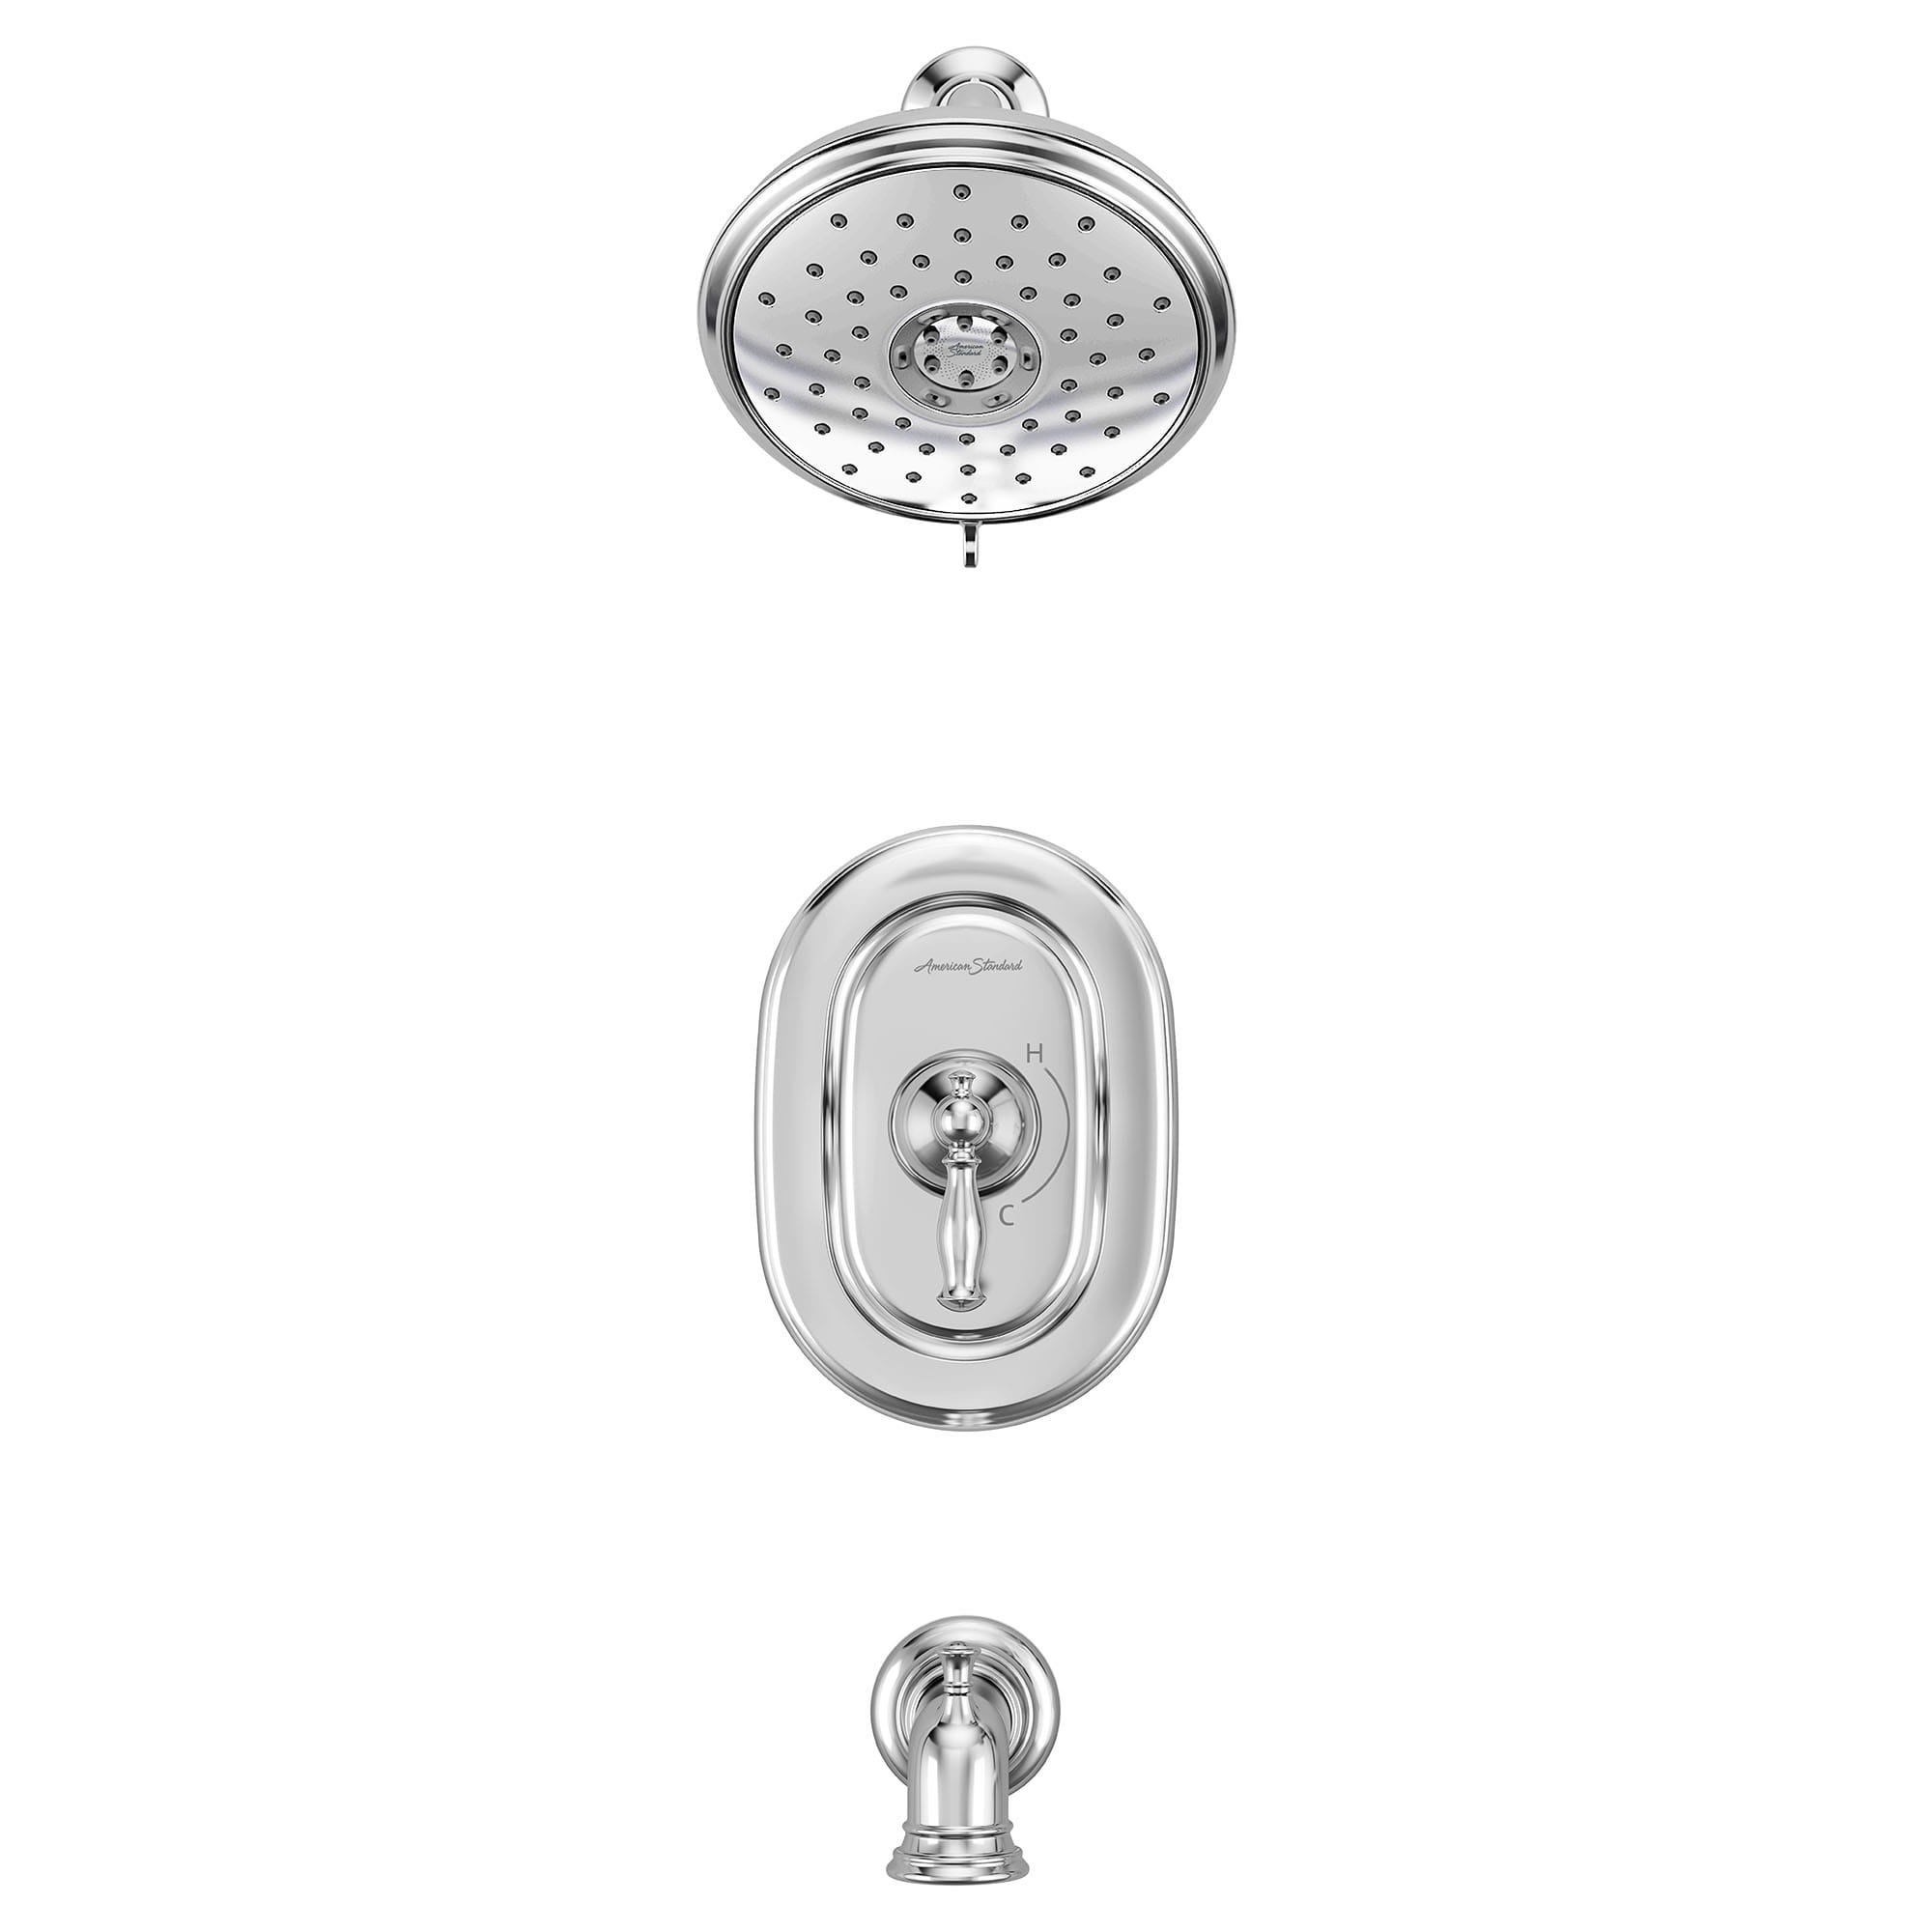 Quentin® 1.8 gpm /6.8 L/min Tub and Shower Trim Kit With Water-Saving Showerhead, Double Ceramic Pressure Balance Cartridge With Lever Handle